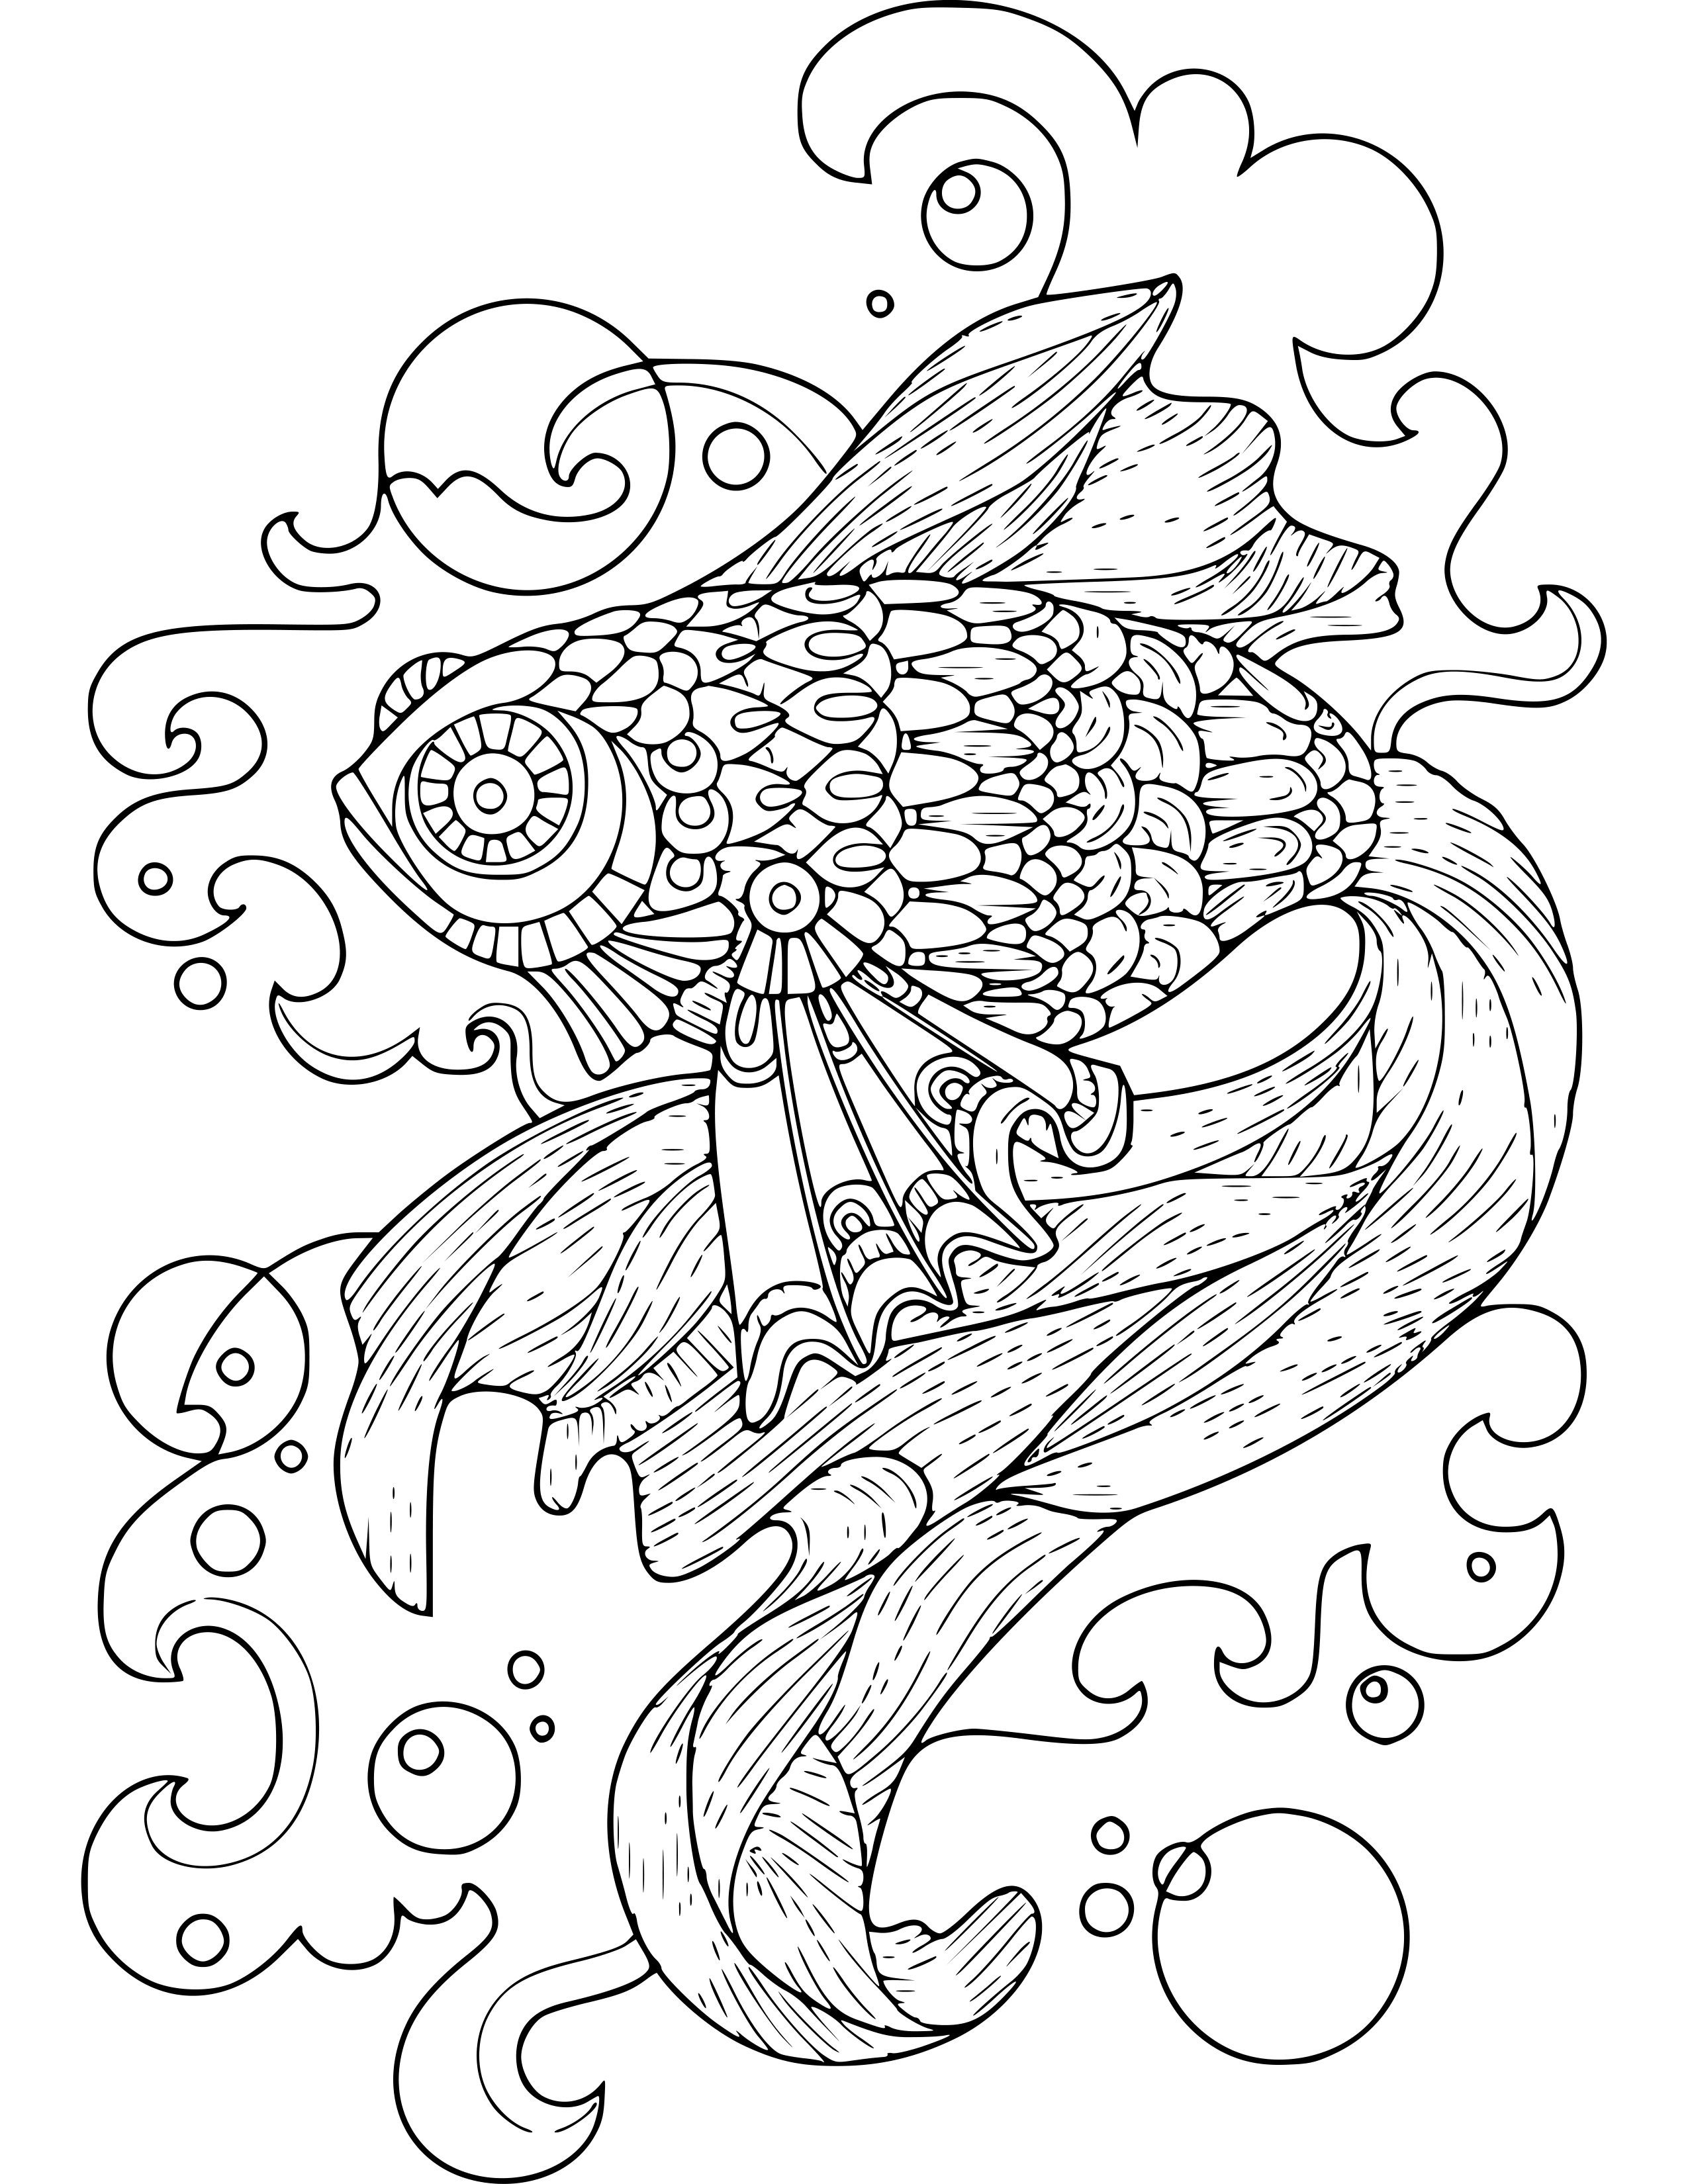 coloring-pages-animals-printable-photos-cantik